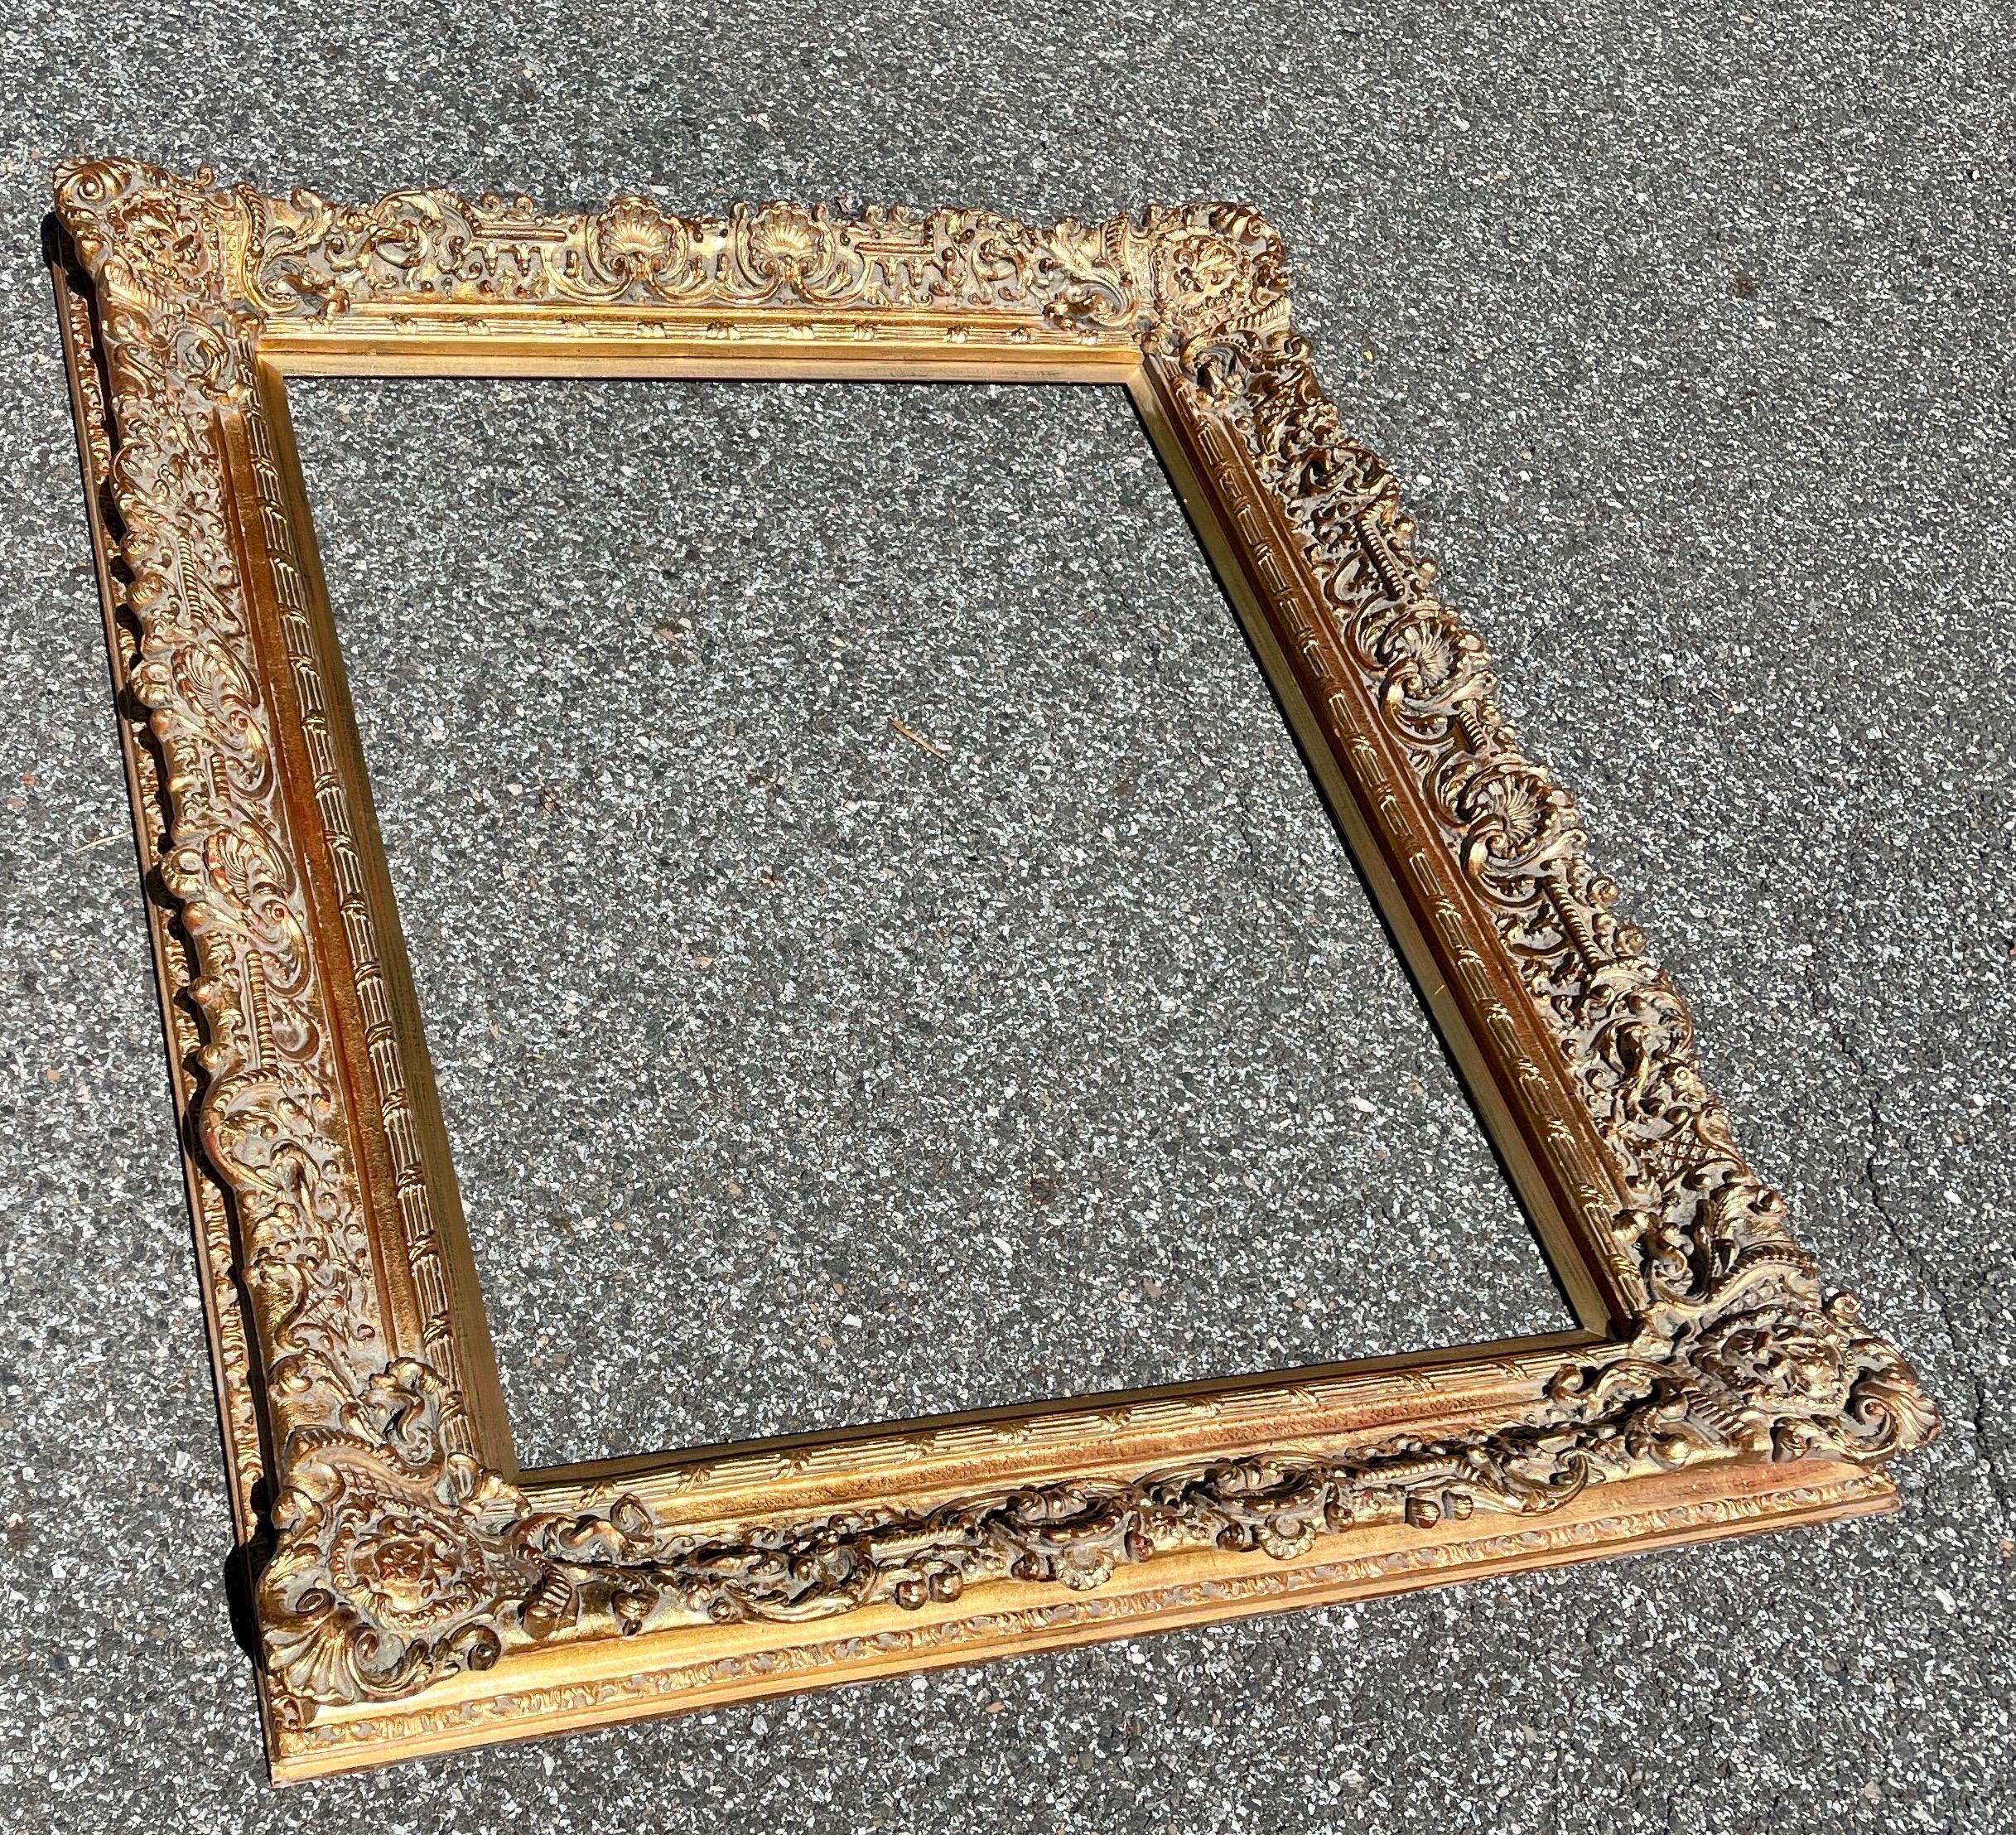 20th Century Large Ornate Carved Gilt Wood Frame, French Rococo Style  11